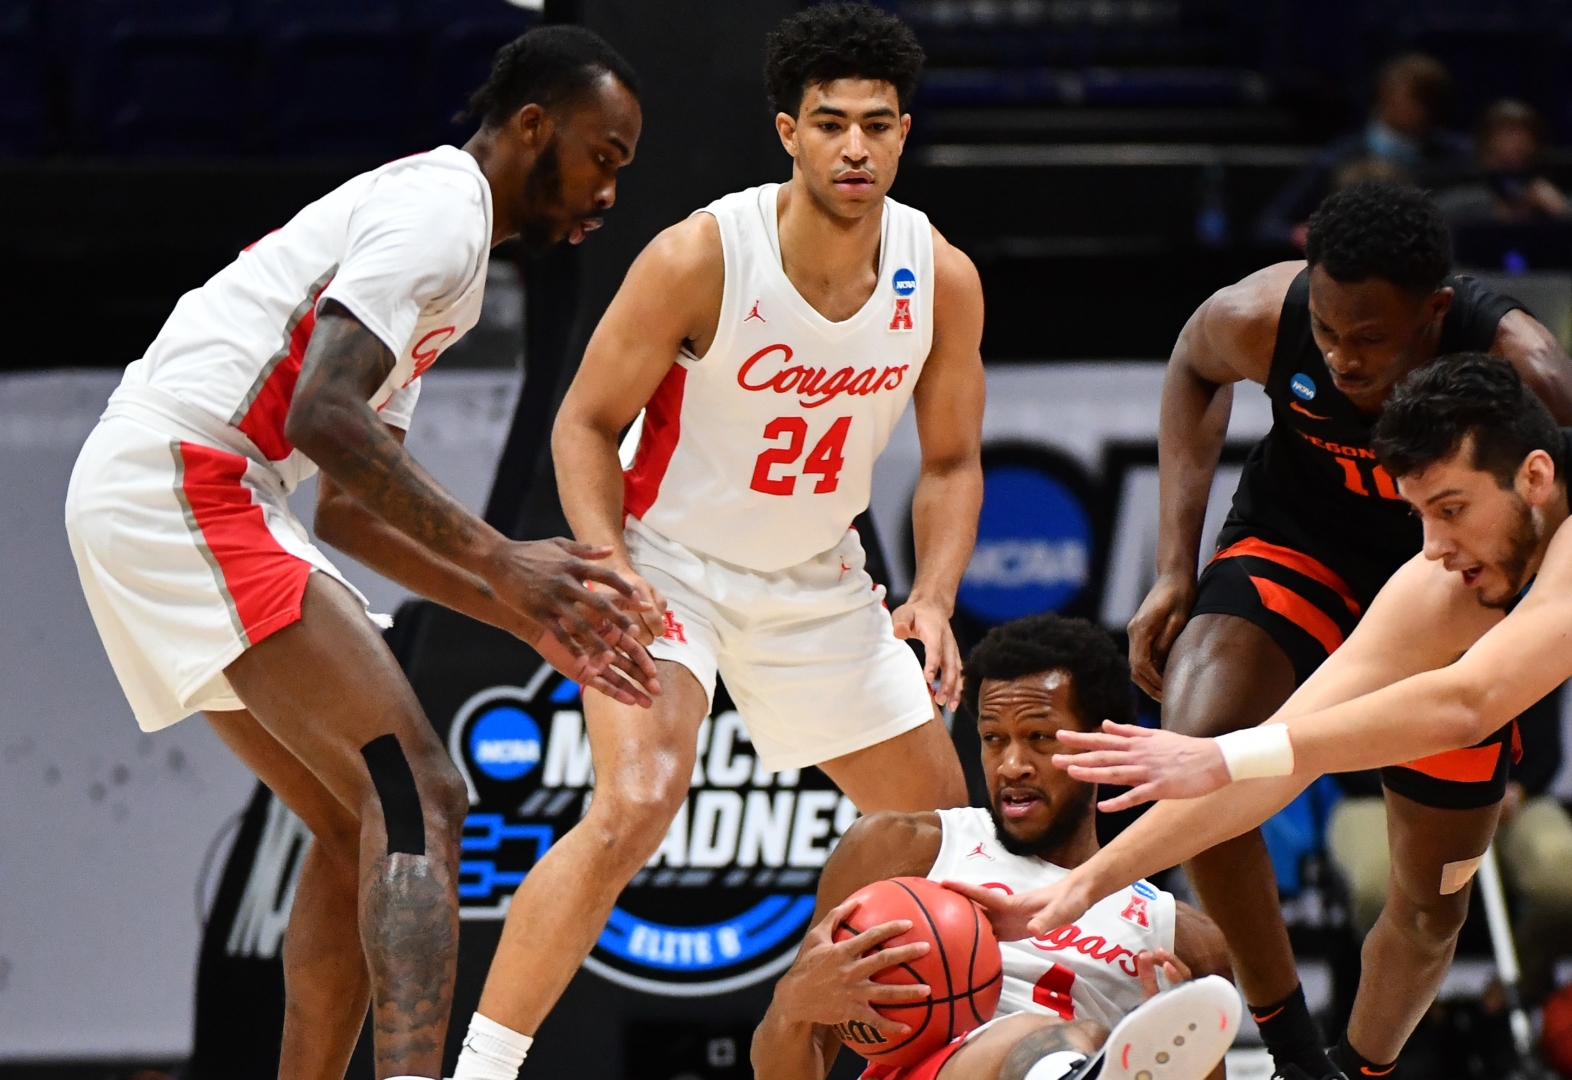 Justin Gorham (4) of the Houston Cougars fights for possession of the ball in a scrum against the Oregon State Beavers in the Elite Eight round of the 2021 NCAA Division I Men's Basketball Tournament held at Lucas Oil Stadium on March 29, 2021 in Indianapolis, Indiana. UH will play Baylor in the Final Four. | Photo by Brett Wilhelm/NCAA Photos via Getty Images